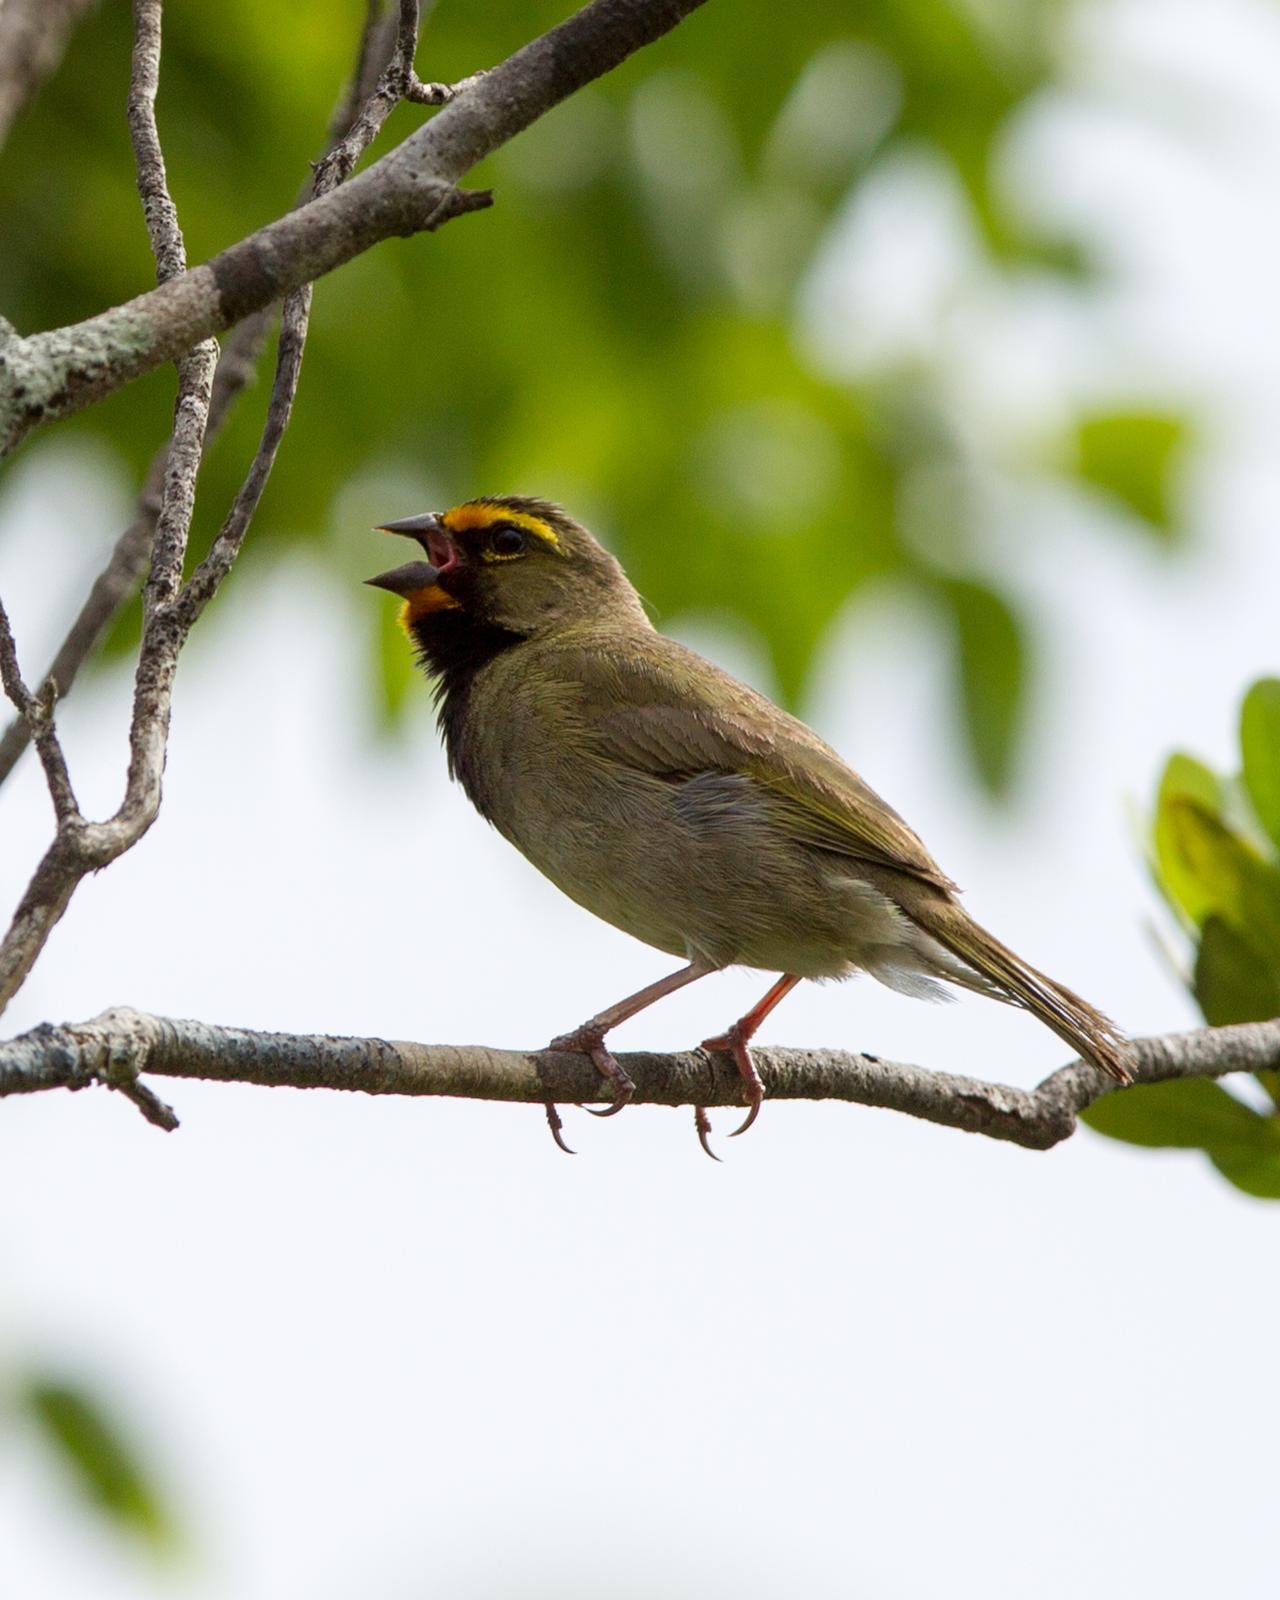 Yellow-faced Grassquit Photo by Kevin Berkoff